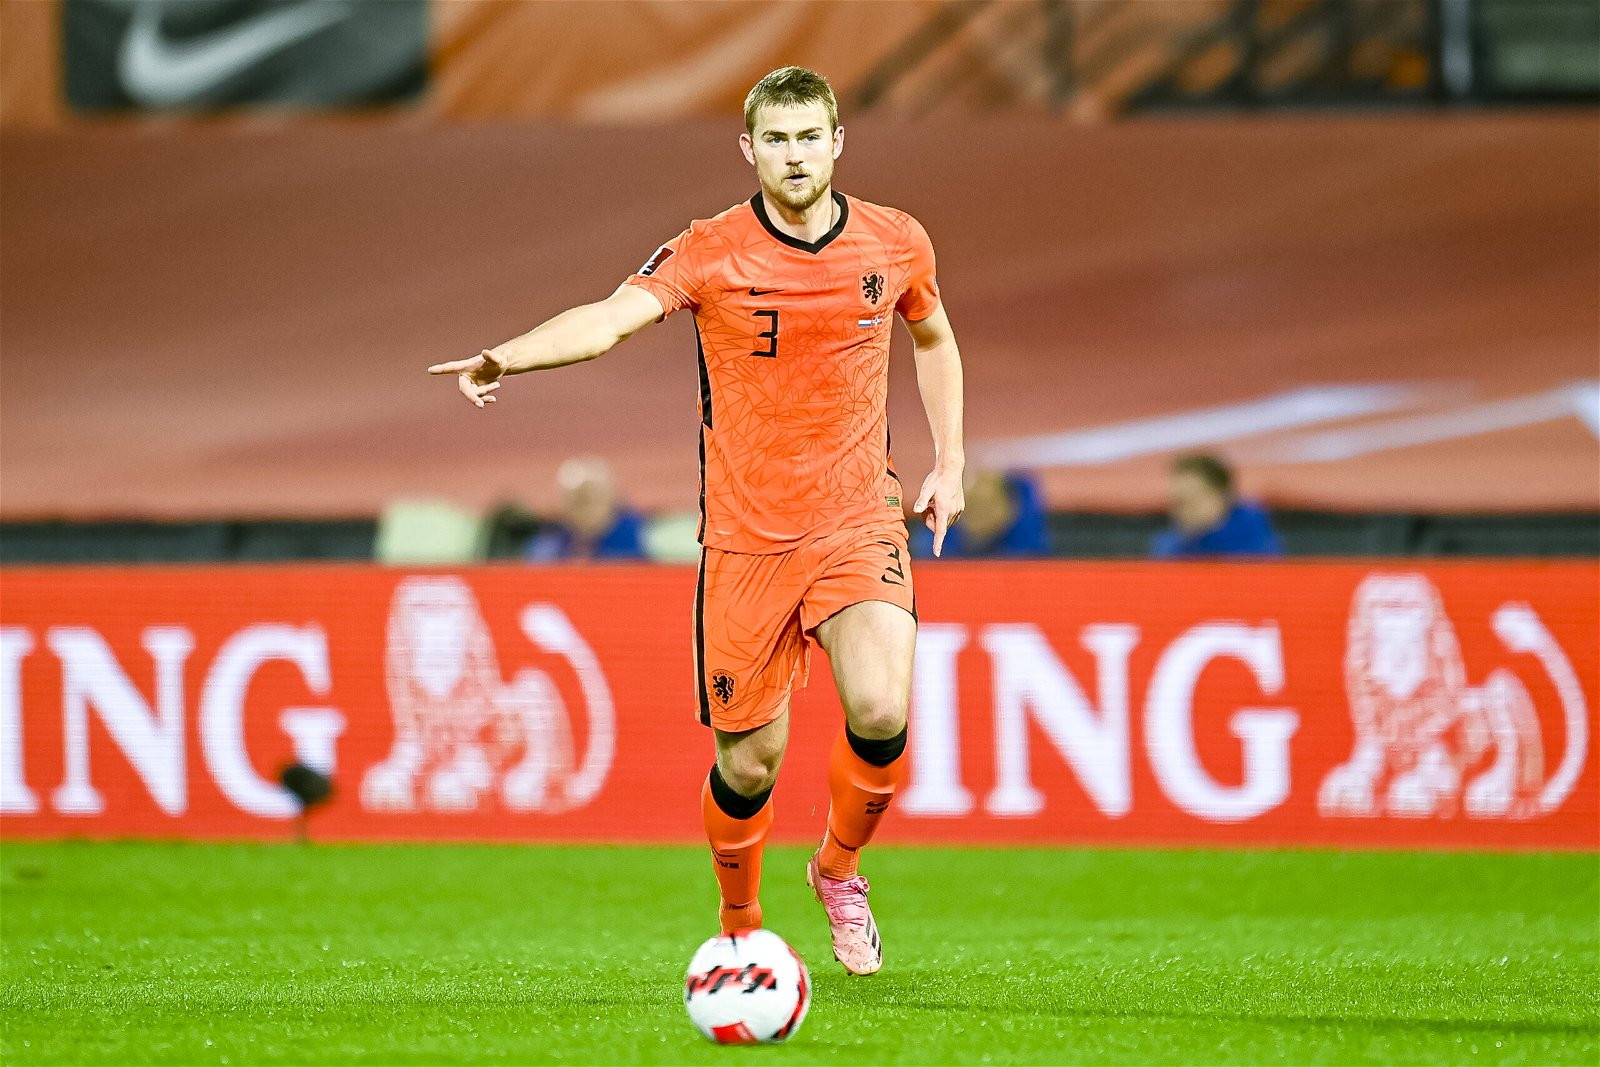 De Ligt - Netherlands Players To Watch Out For At World Cup